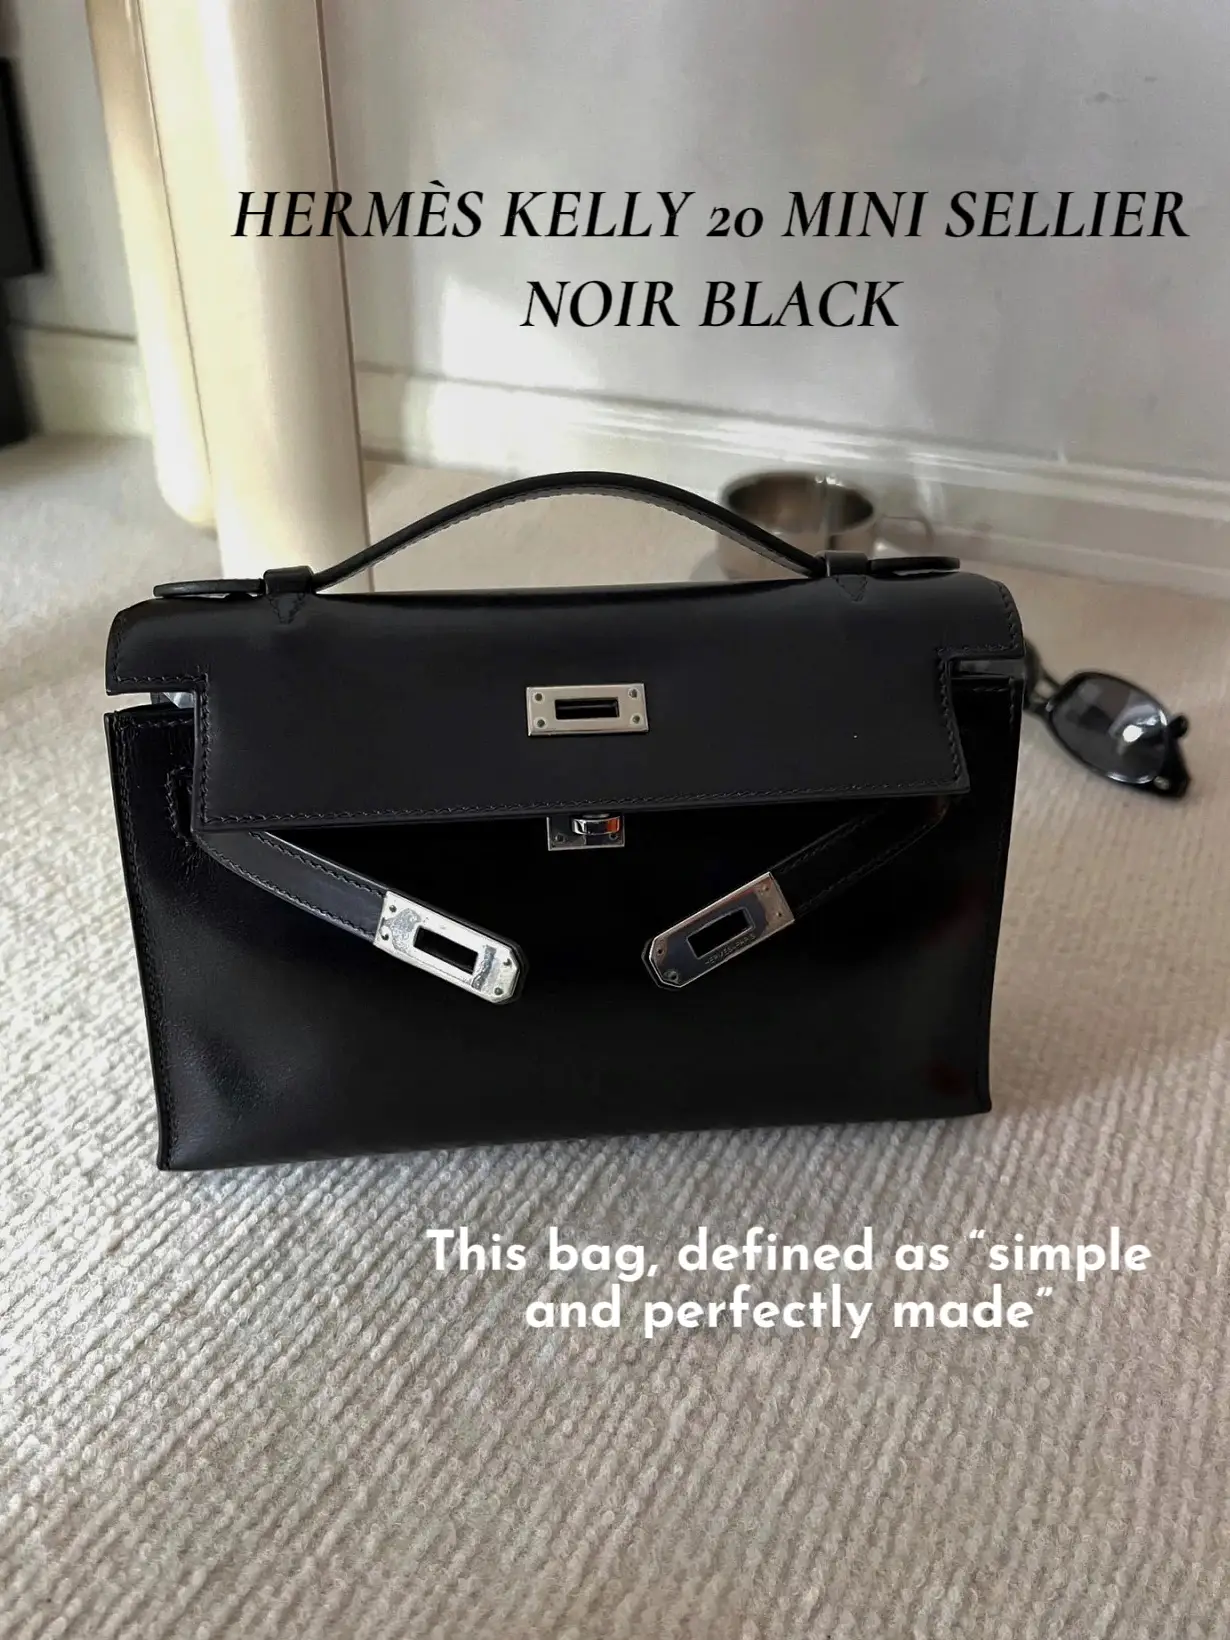 Best Kelly-like bags? Hermes is out or reach for me but what